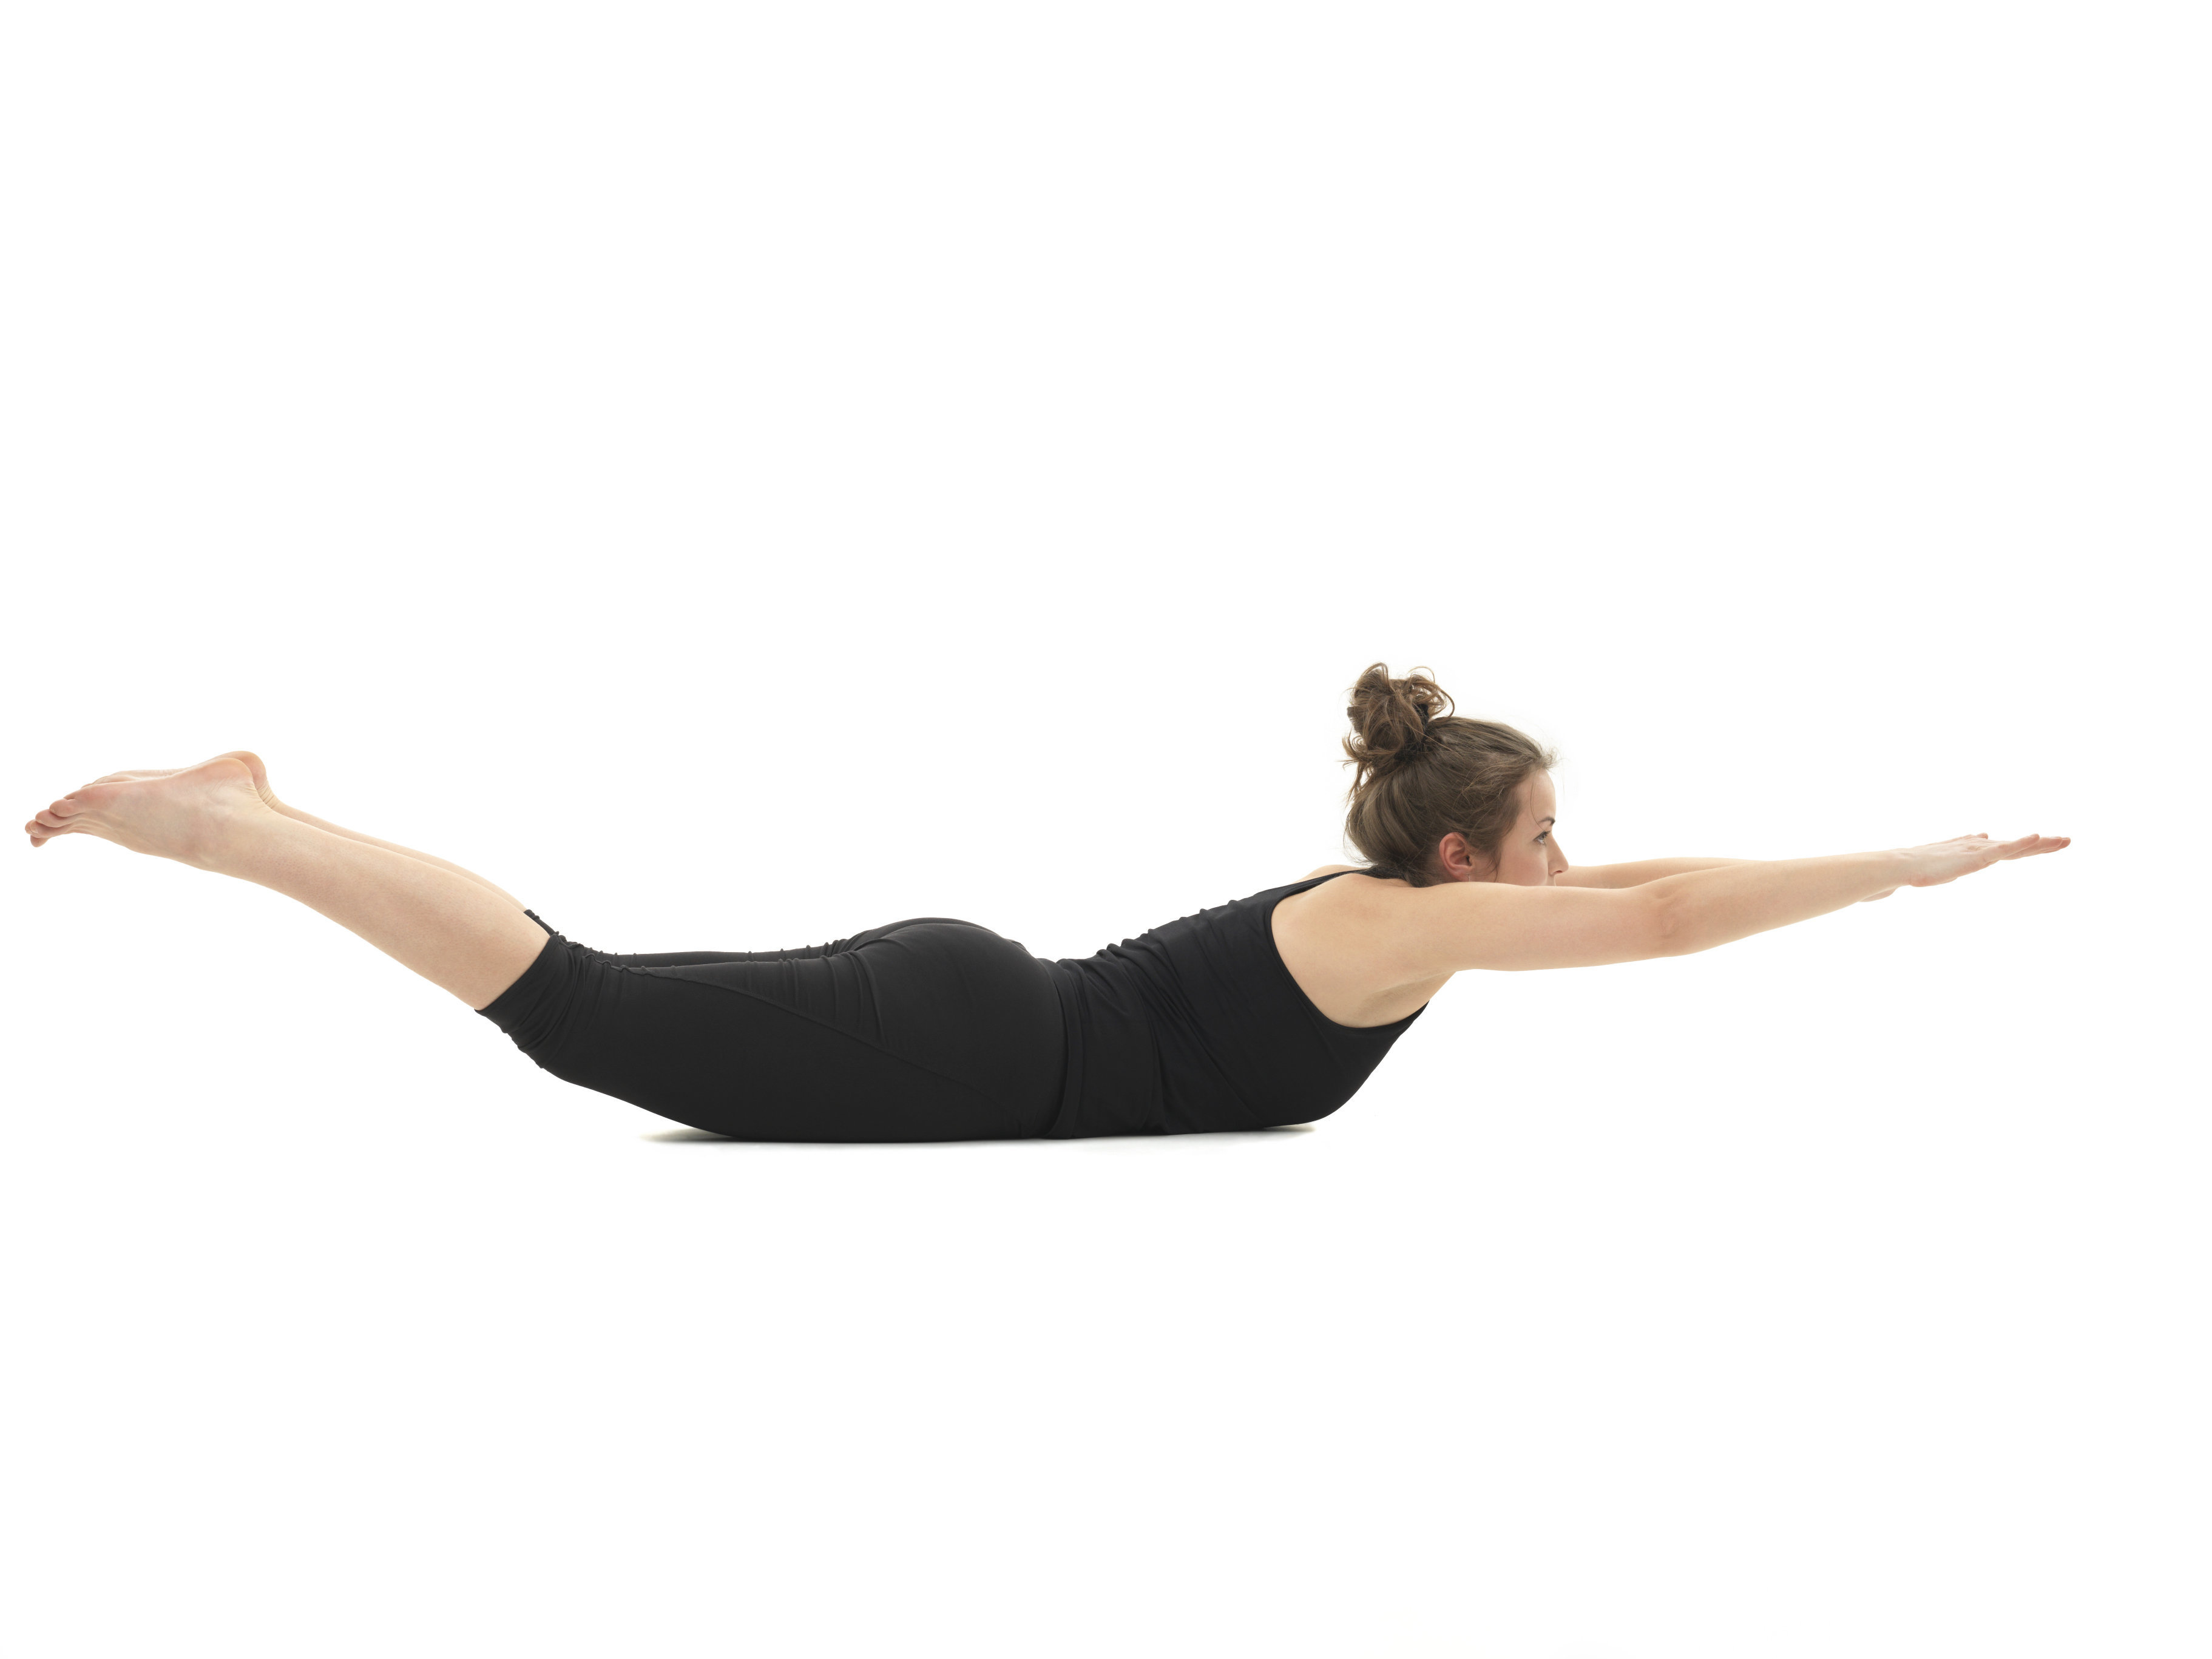 Kimayoga - Viparita Shalabhasana /Superman pose Is an excellent back  strengthening posture that targets muscles in the lower back. And also  helps tightened the abdomen . It gets its name from the